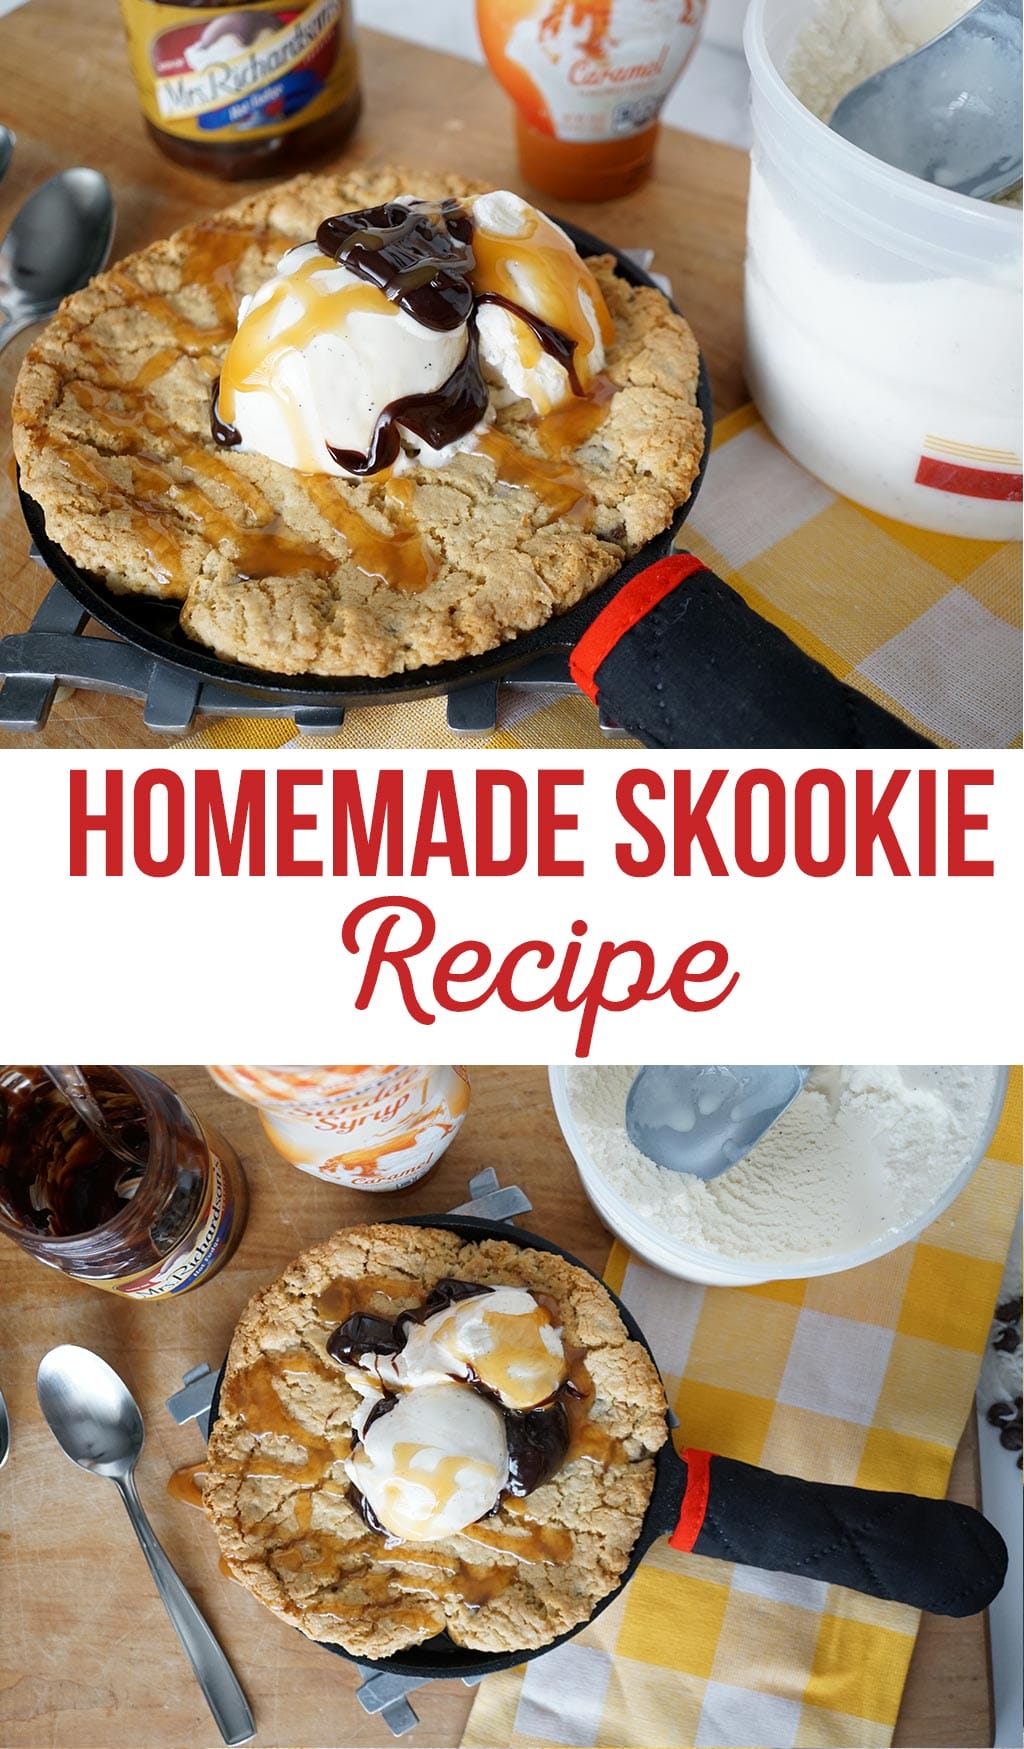 The BEST Homemade Skookie Recipe | Skookies = skillet + cookies | Whatever you want to call this dessert of deliciousness... these are amazing!